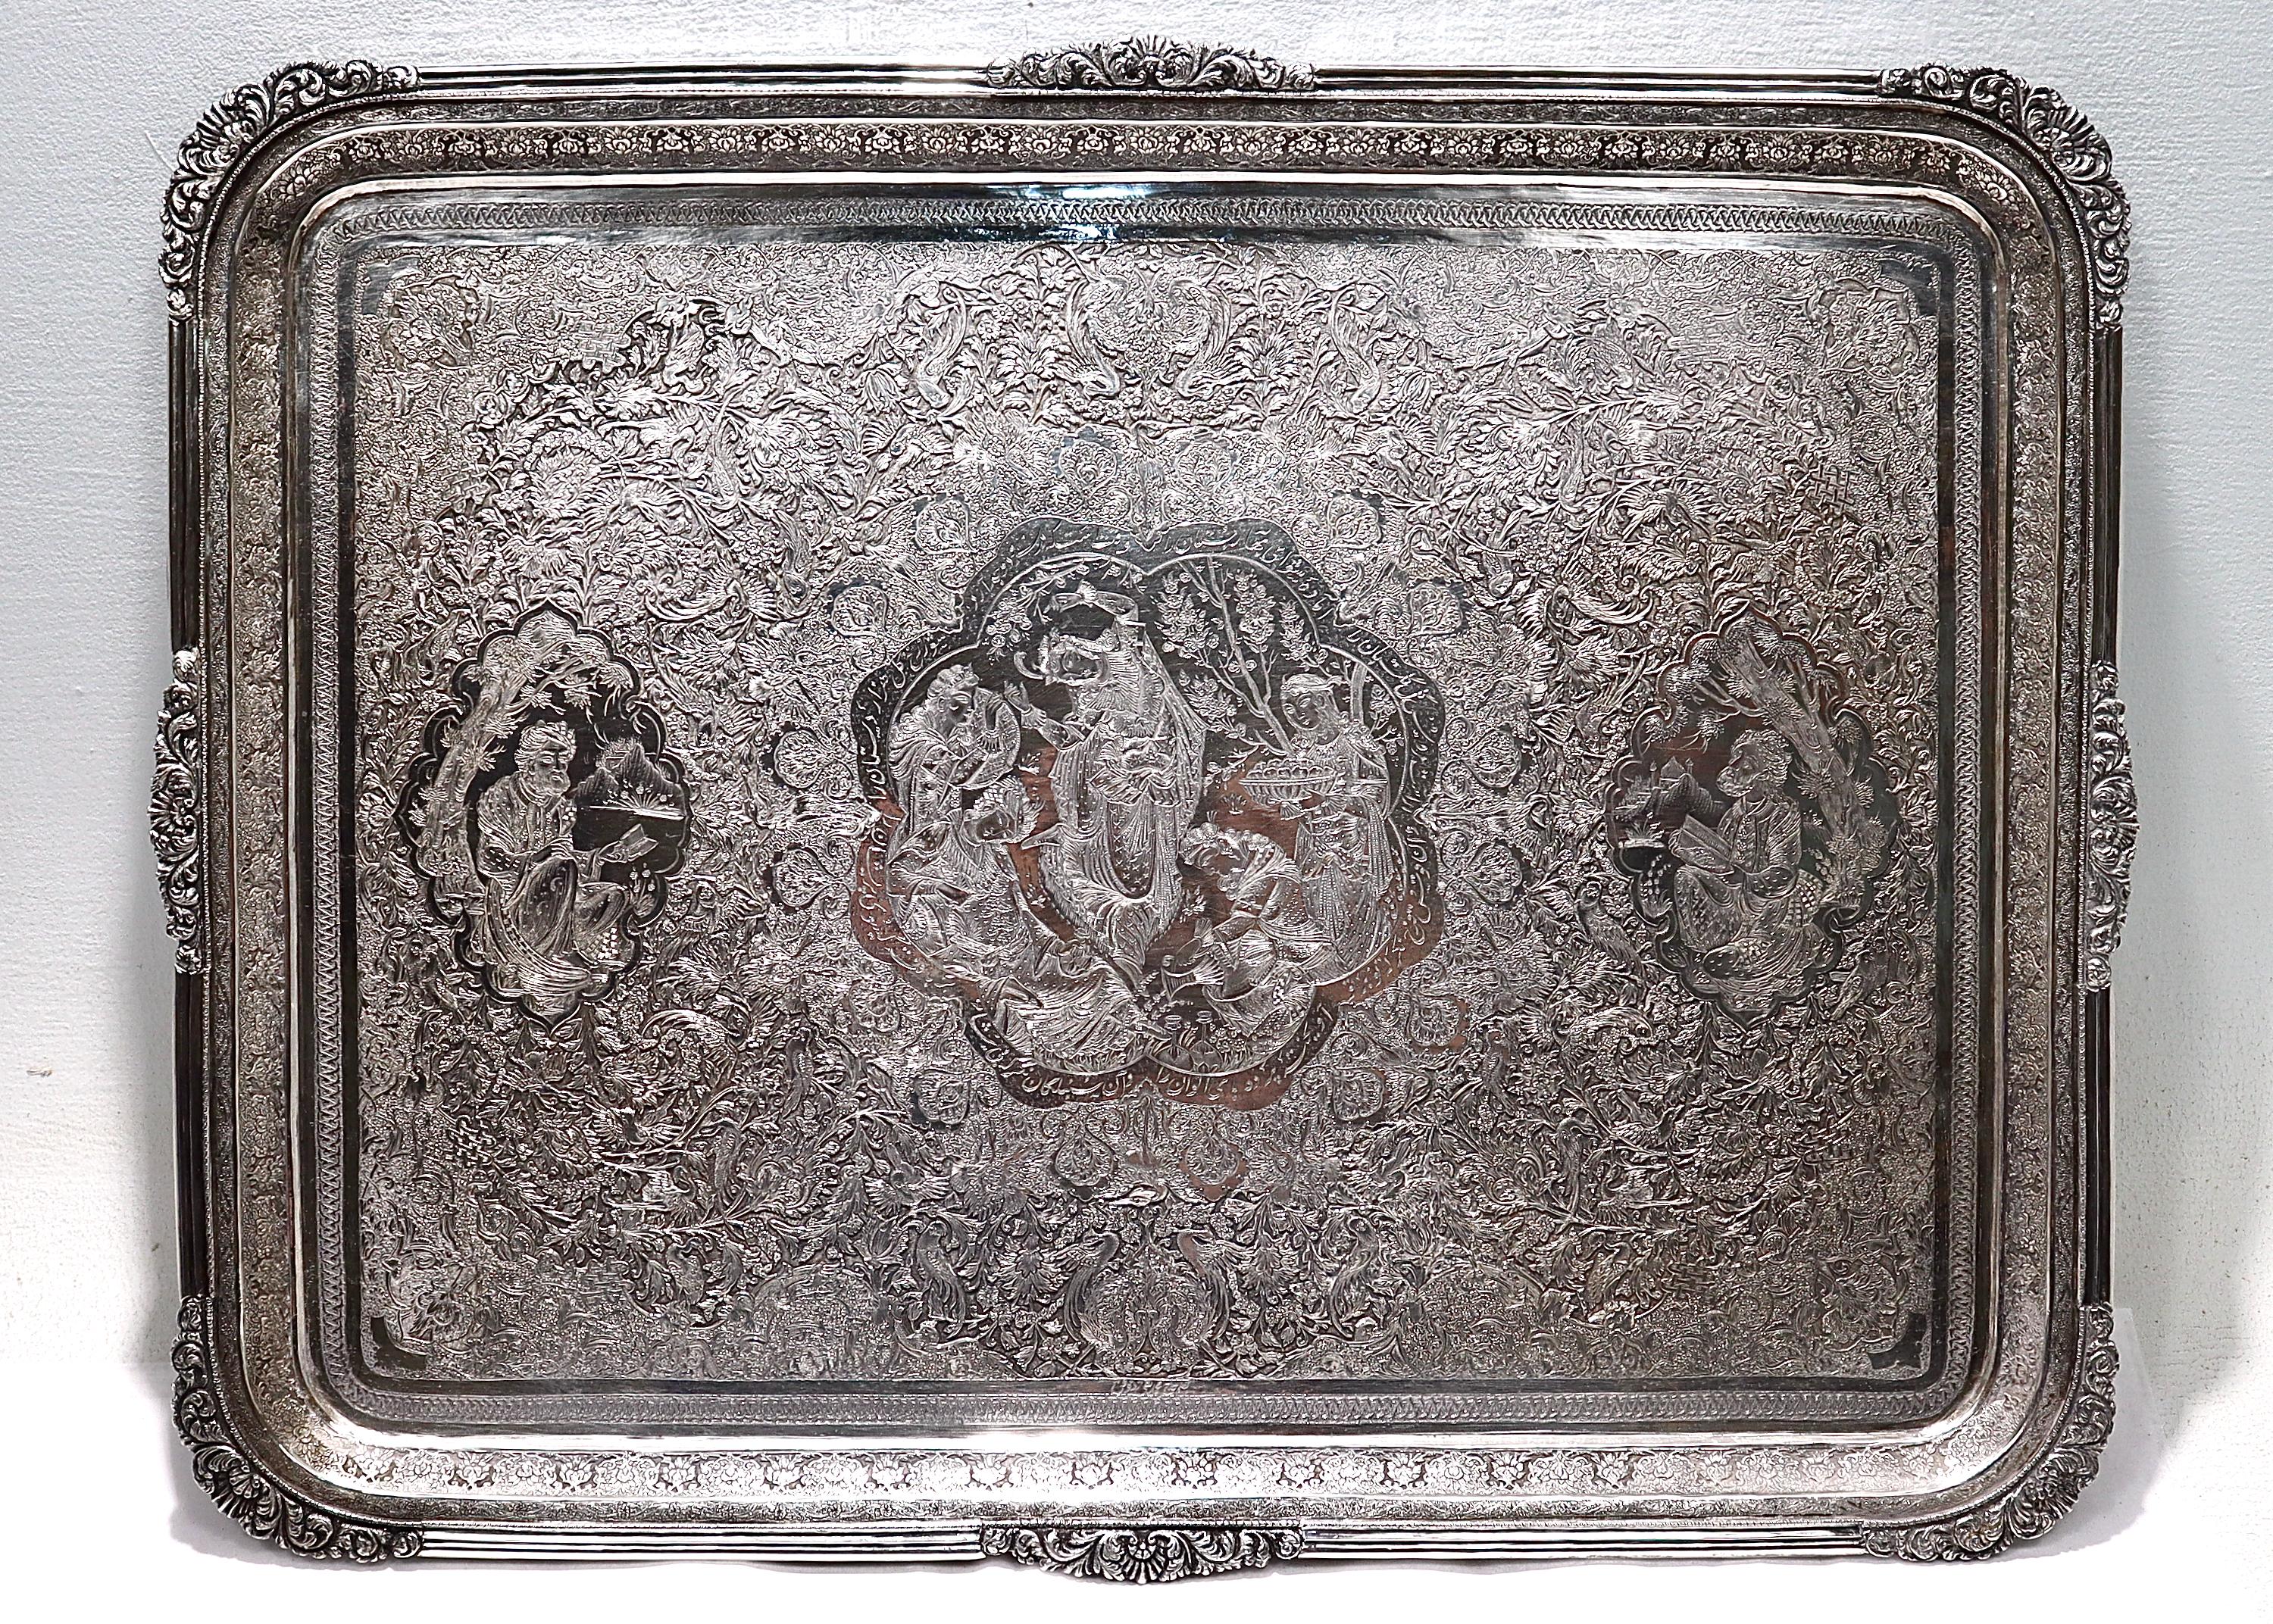 A fine old or antique Islamic silver tray.

With incised & carved decoration throughout including cartouches depicting poets or scholars reading and a festive scene with maidens dancing. 

The central cartouche is encircled with an Arabic